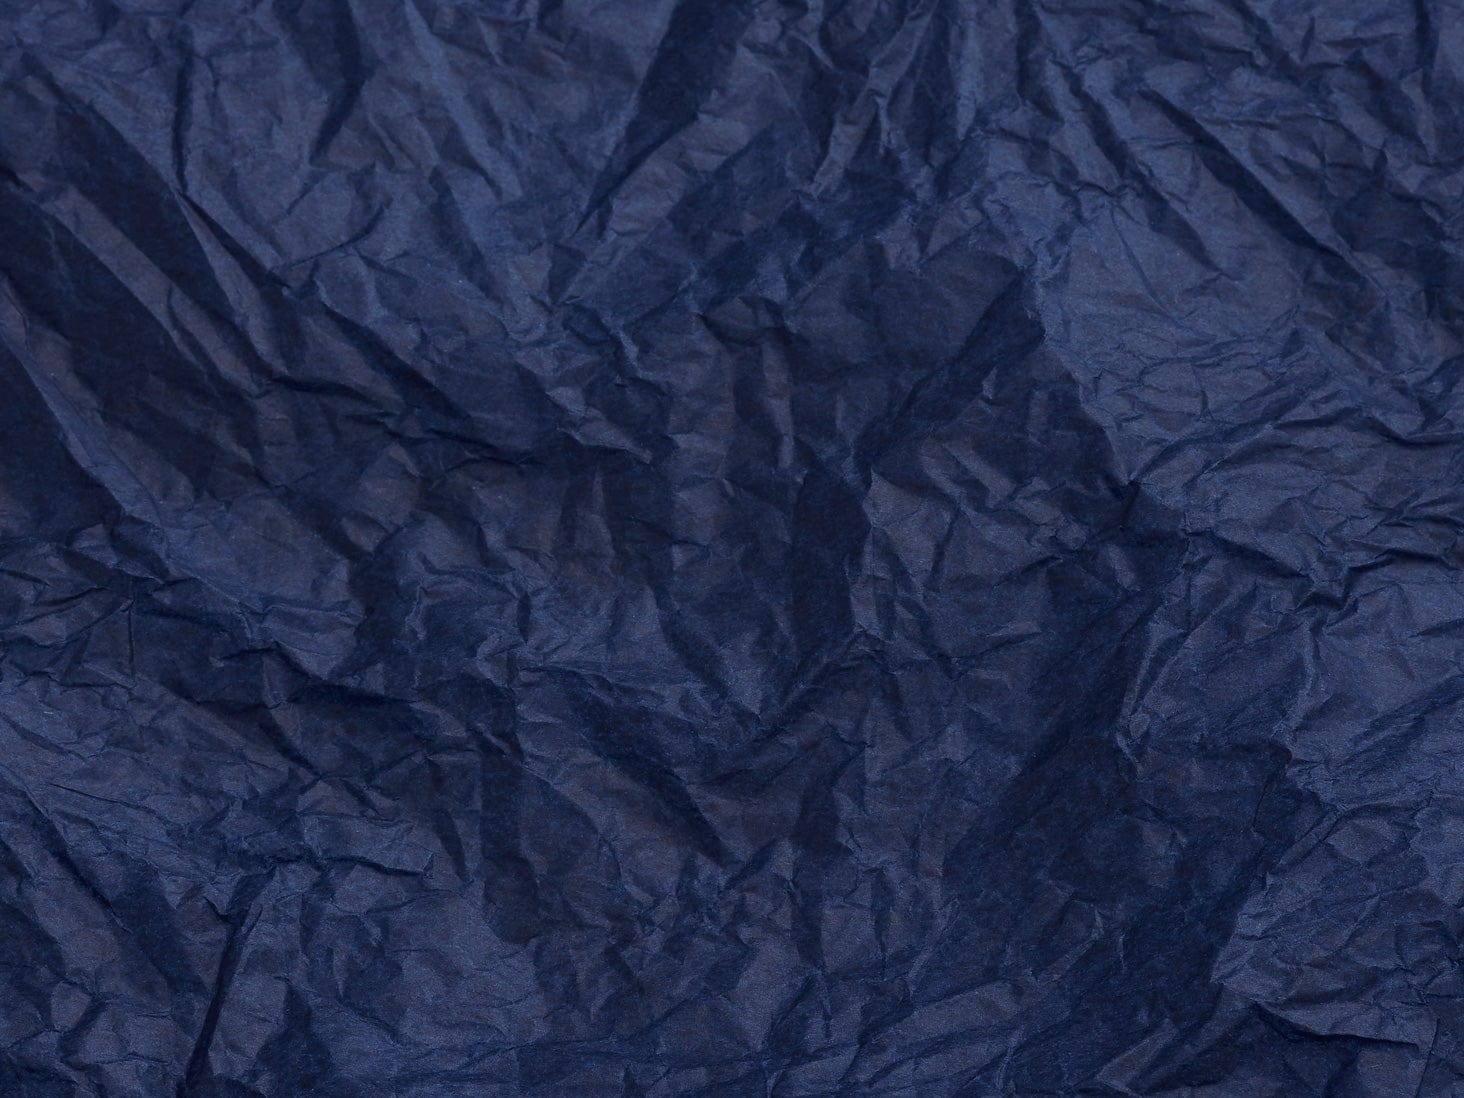 Luxury Tissue Paper - Navy 96 Sheets 🎁